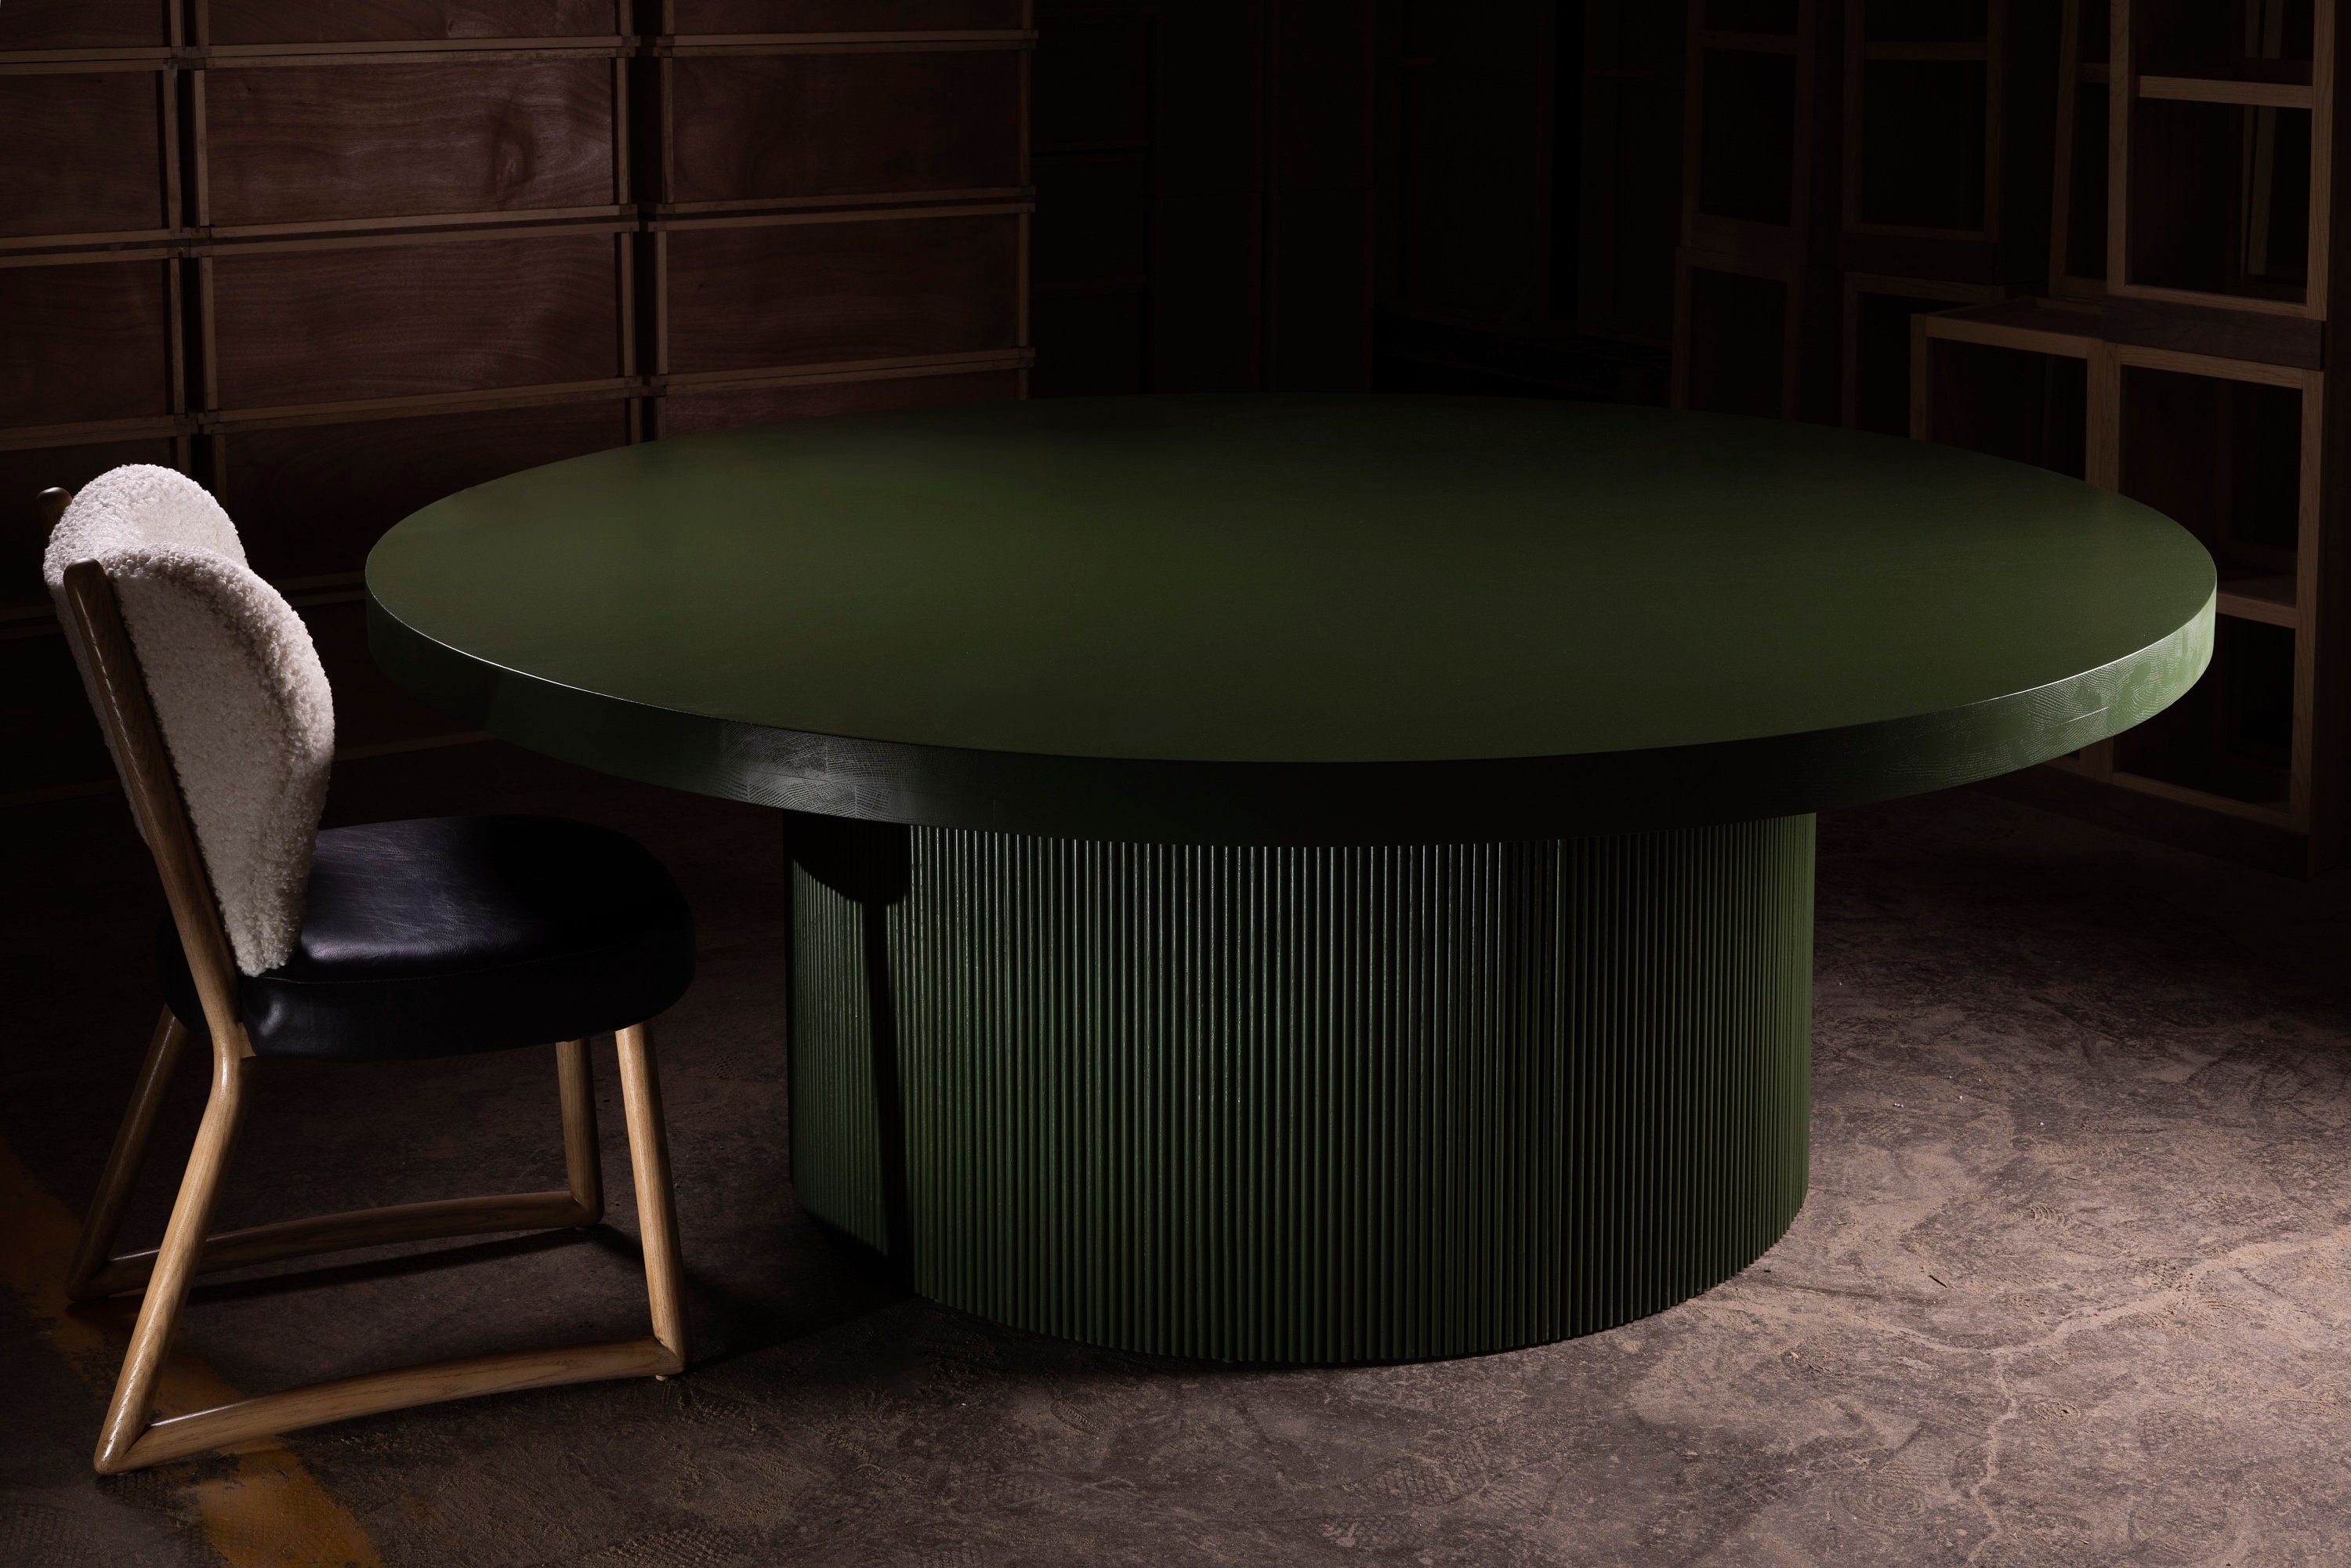 Tambour Table With A Puzzling Secret